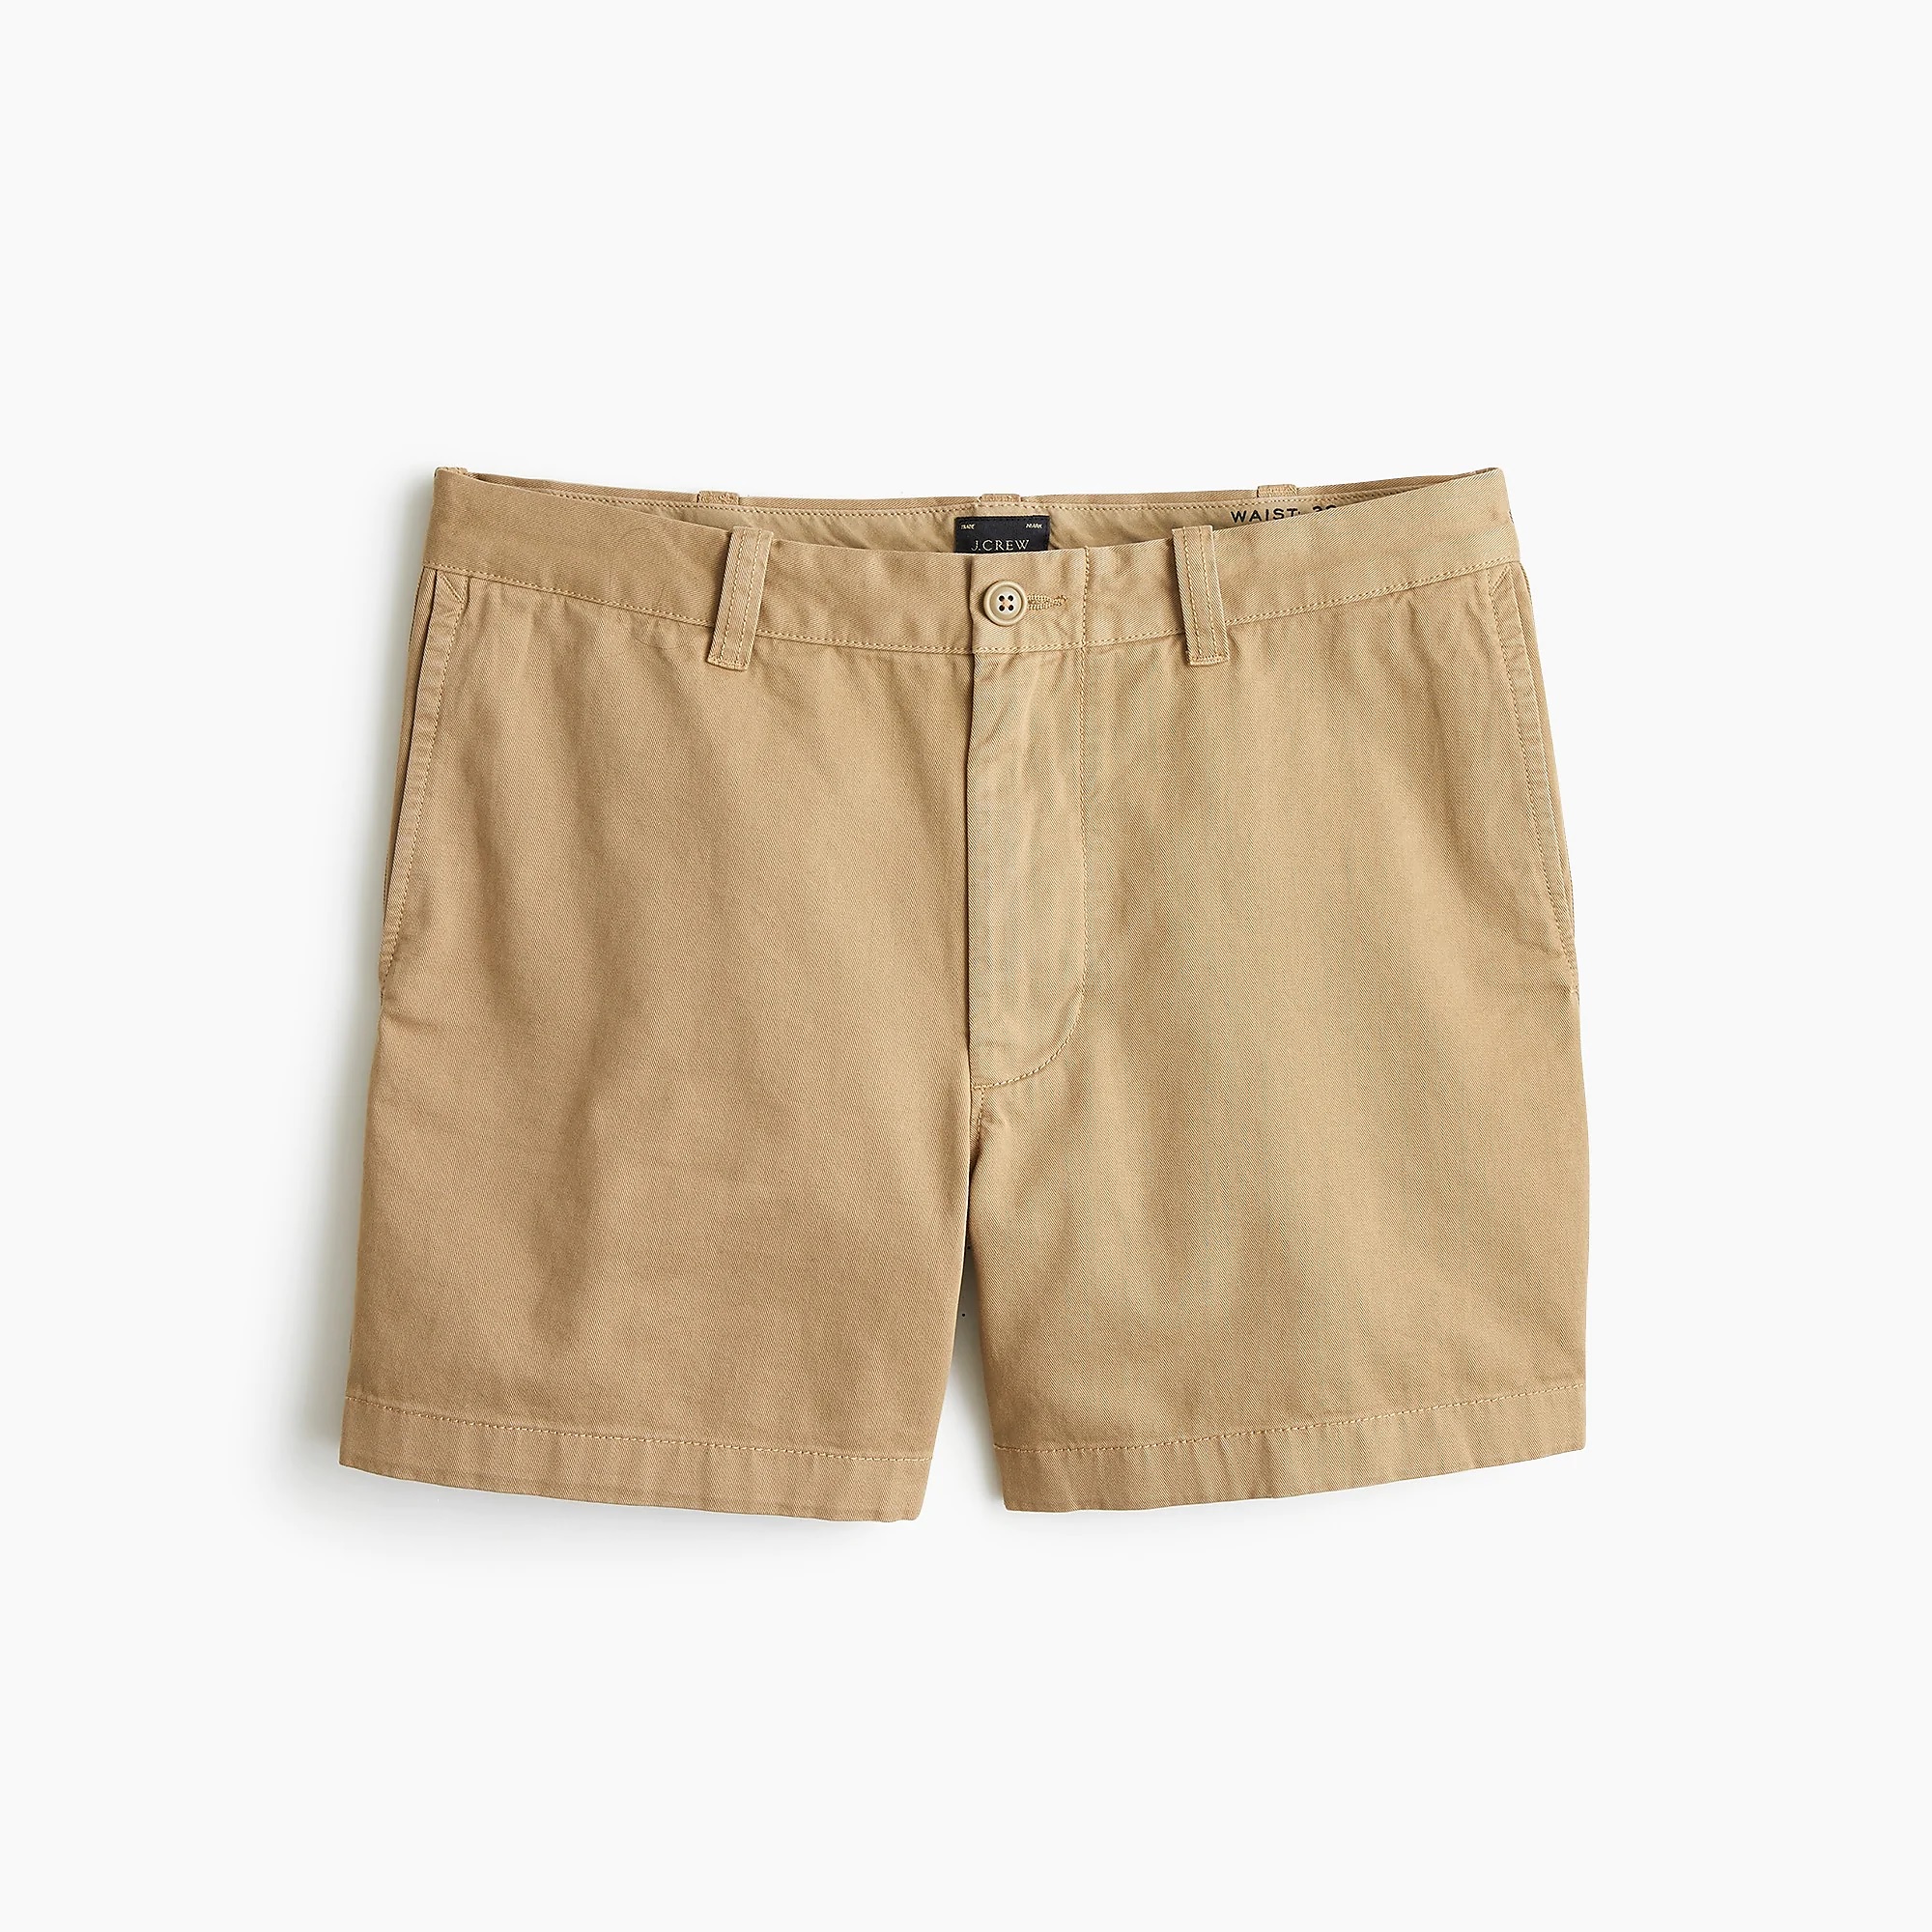 5 inch shorts men: Enhancing Your Summer Style缩略图